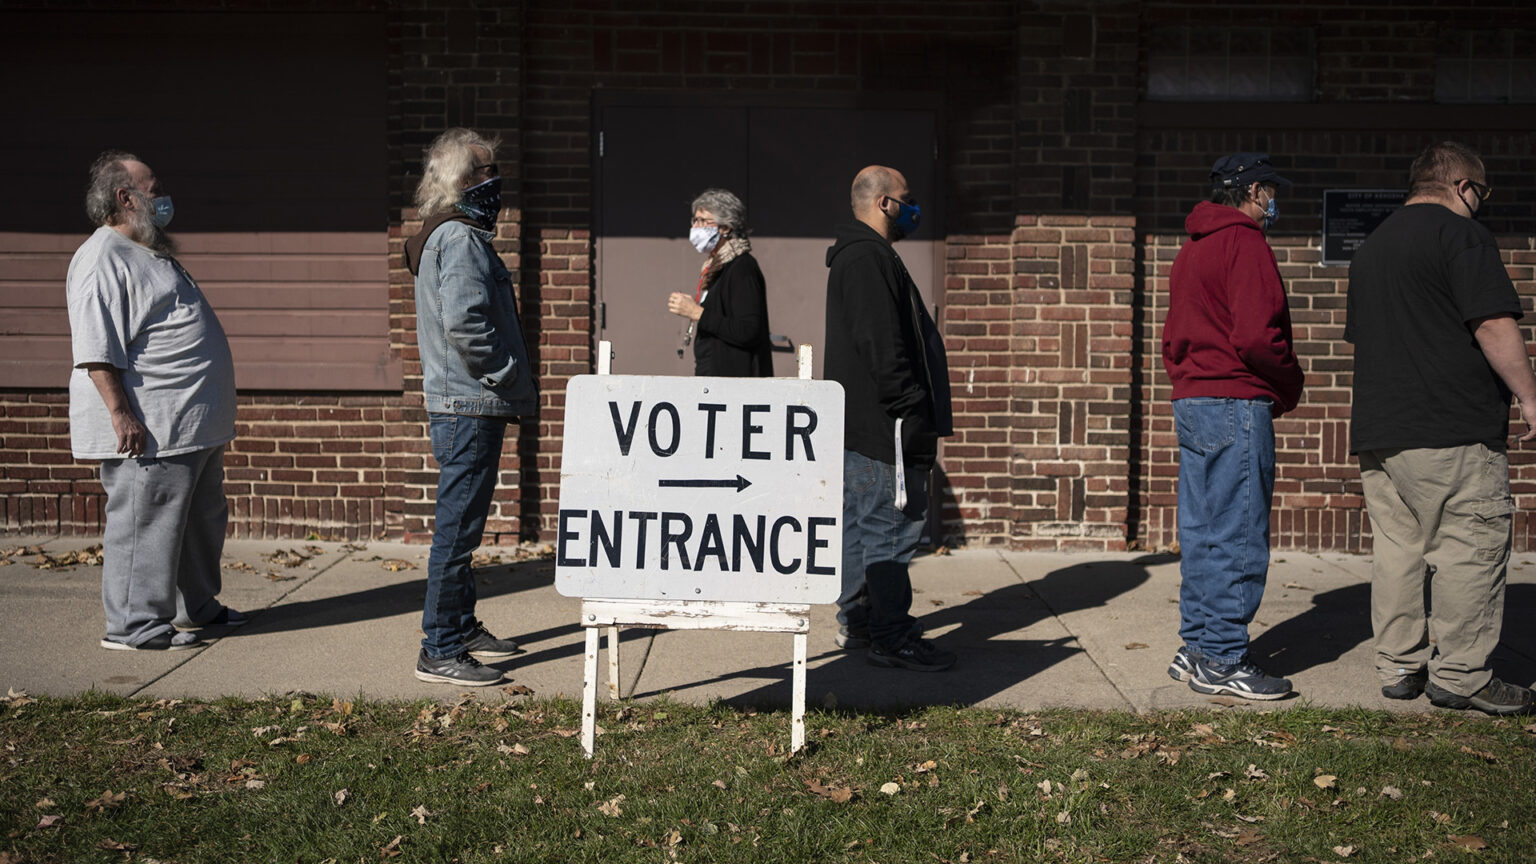 People stand in line on a sidewalk next to a building with brick walls, with a sandwich board sign in the foreground reading Voter Entrance with an arrow pointing to the right.